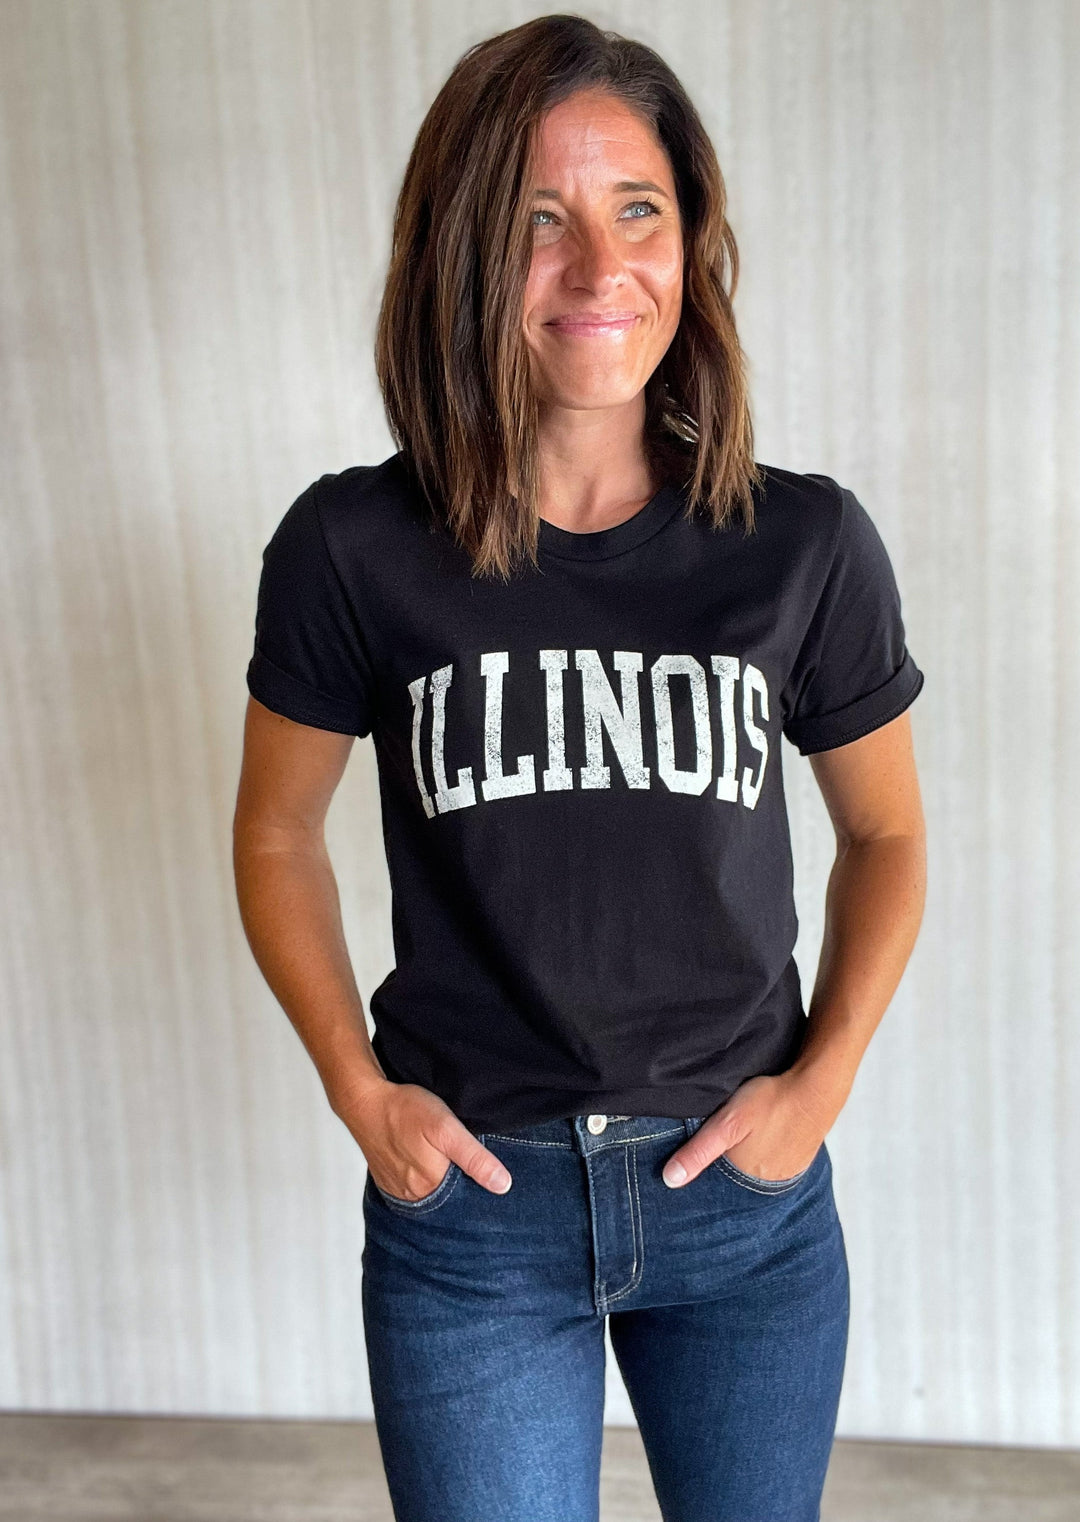 Black Illinois T-Shirt with White Distressed Text that reads "ILLINOIS" | Central Illinois Women's Clothing Boutique